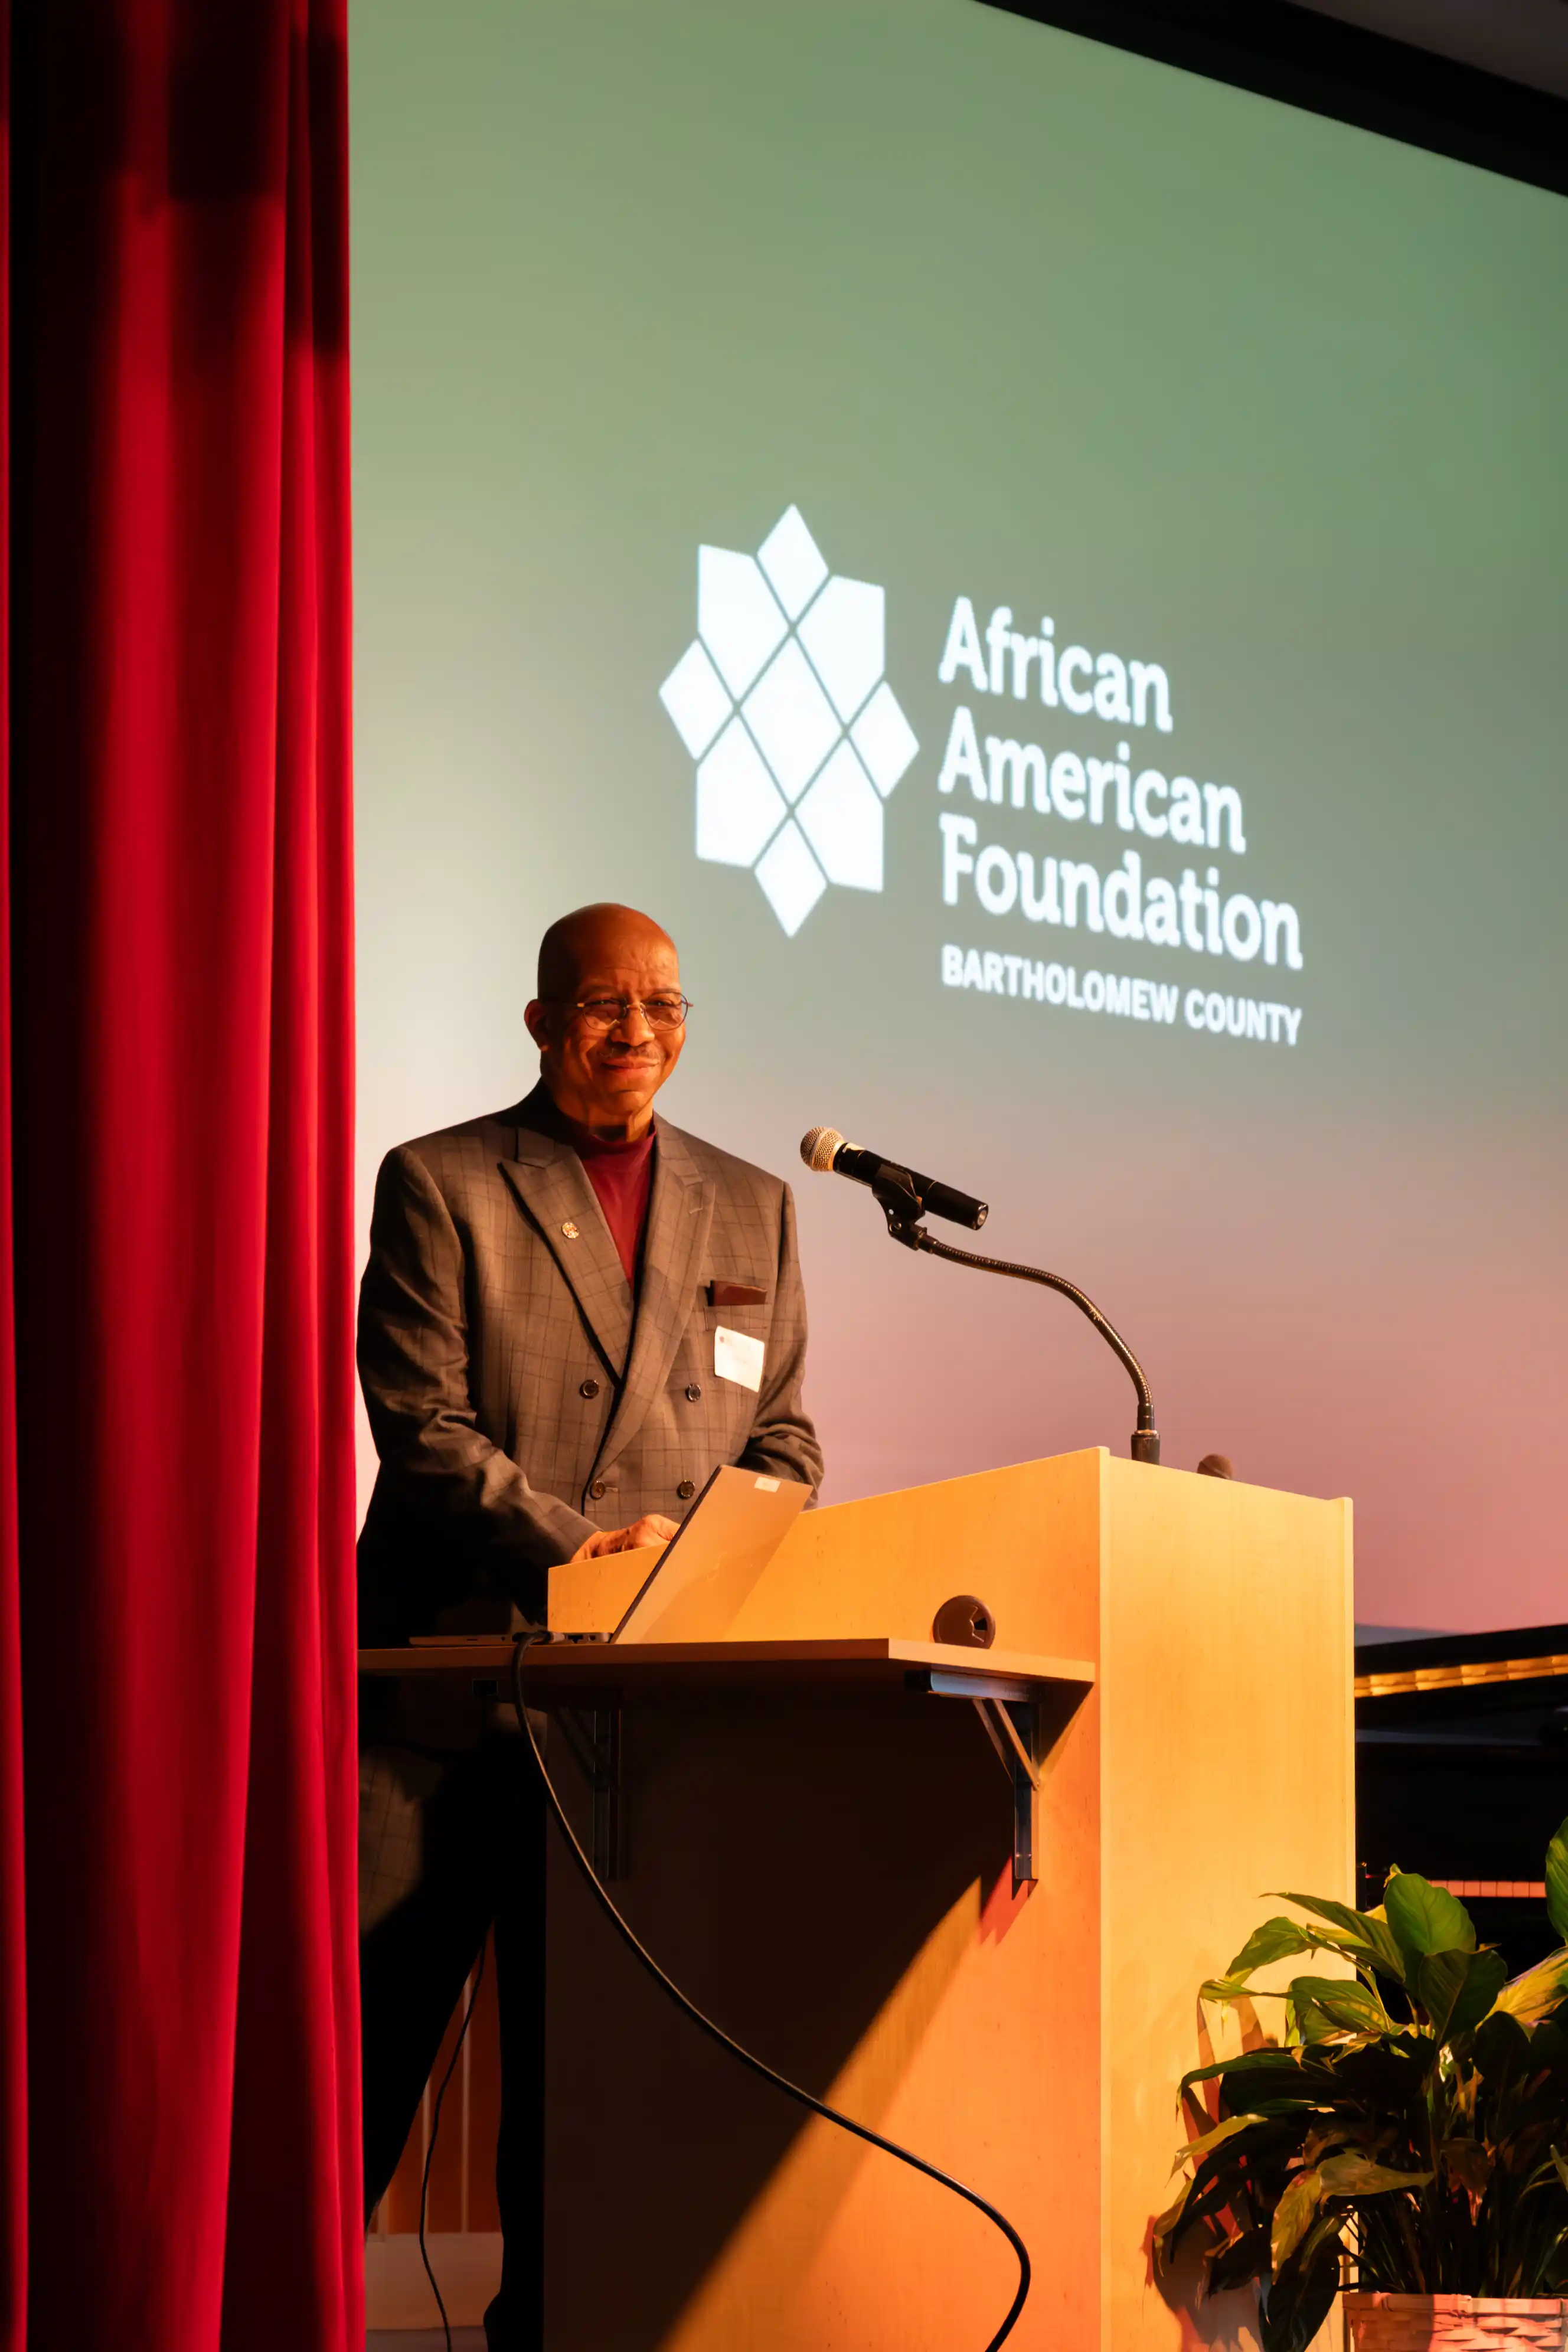 Person delivering a speech at a podium with a banner reading "African American Awareness Association" in the background.